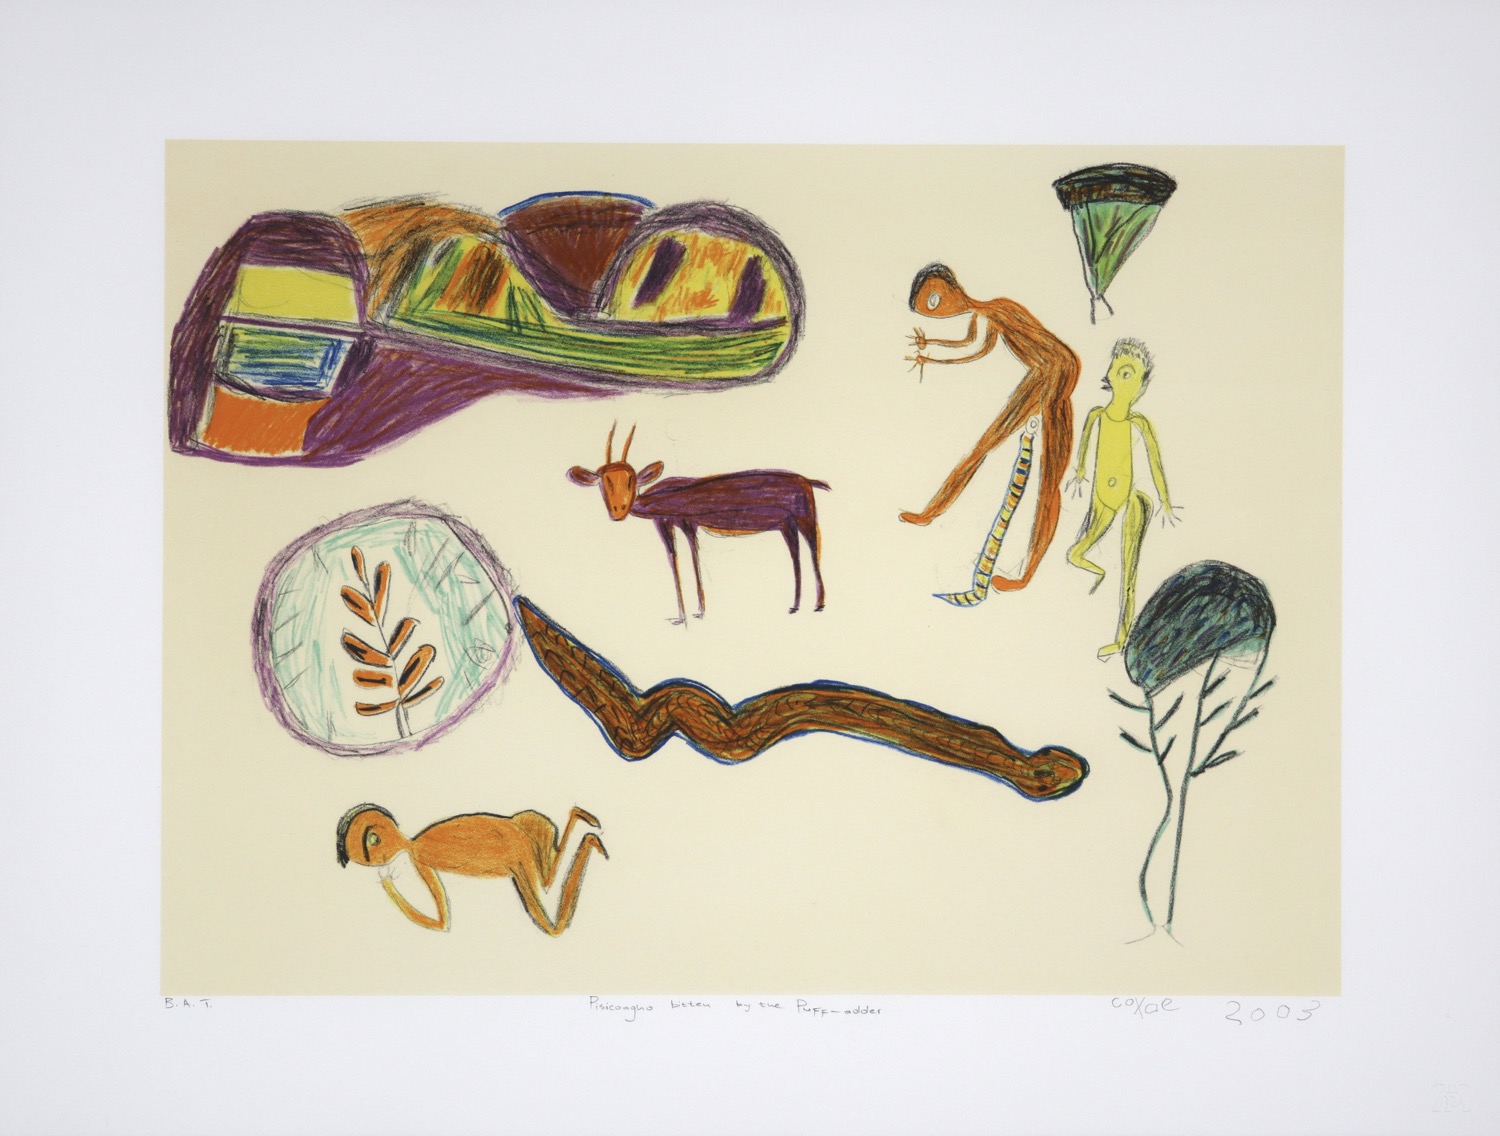 Abstracted landscape depicting a scene from a San folktale with humans, an antelope and snakes